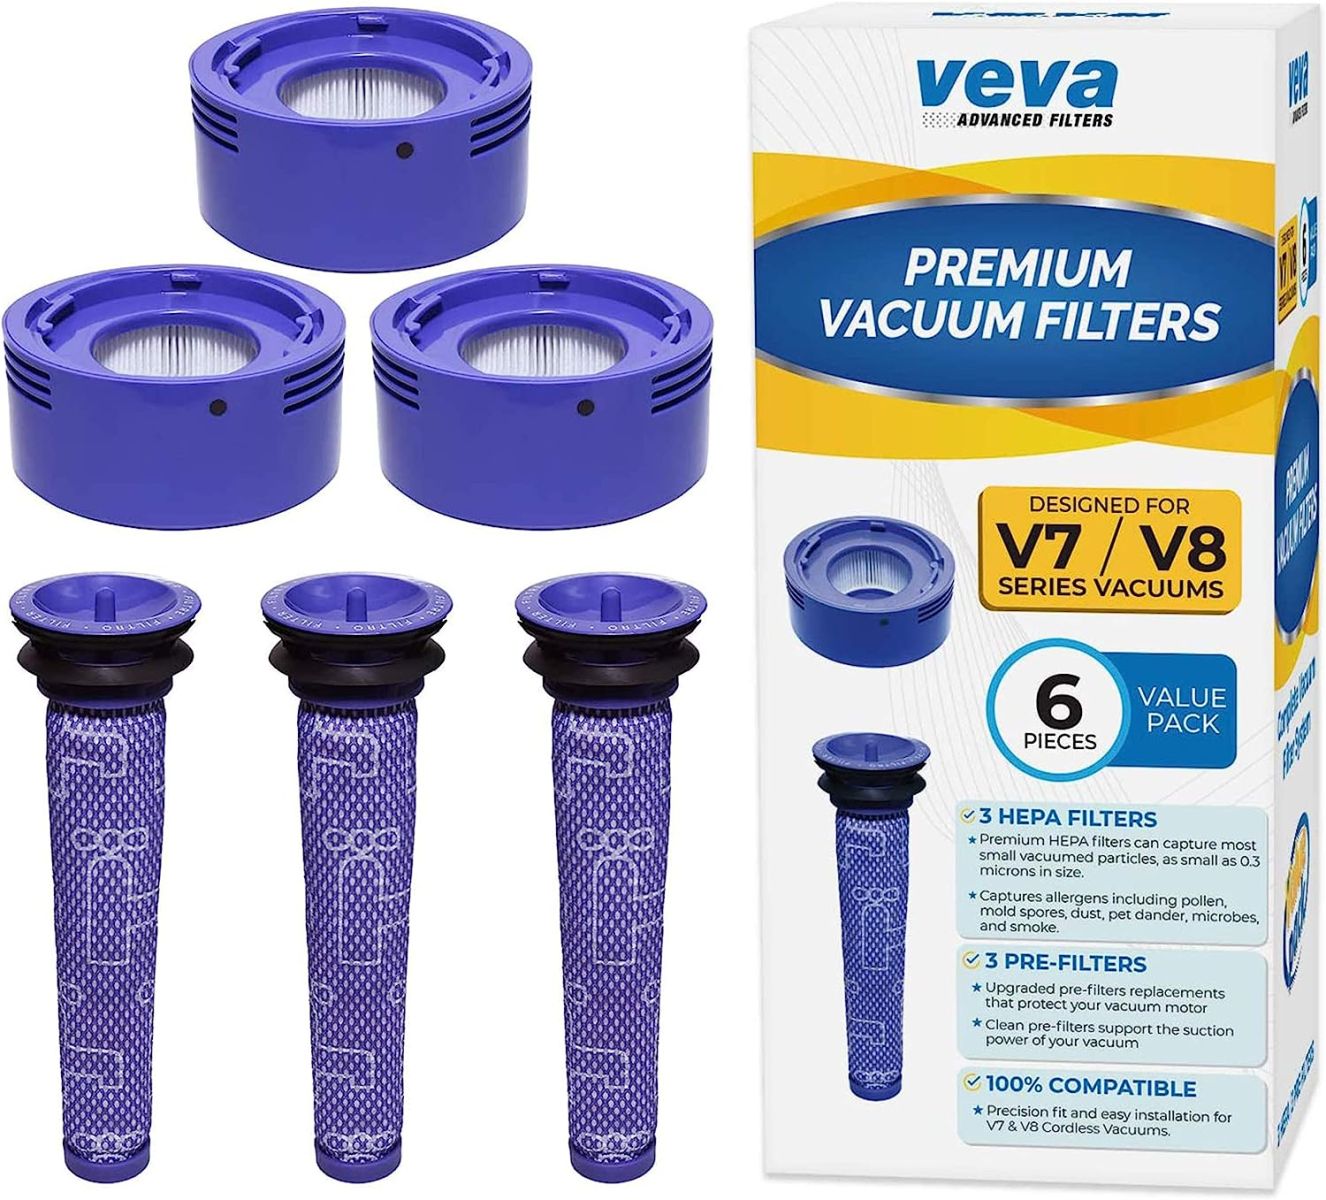 VEVA 6 Pack Premium Vacuum Filter Set with 3 Pre Filters and 3 HEPA Filters Compatible with Dyson V7 & V8 Absolute and Animal Cordless Vacuums, Part # 965661 & 967478